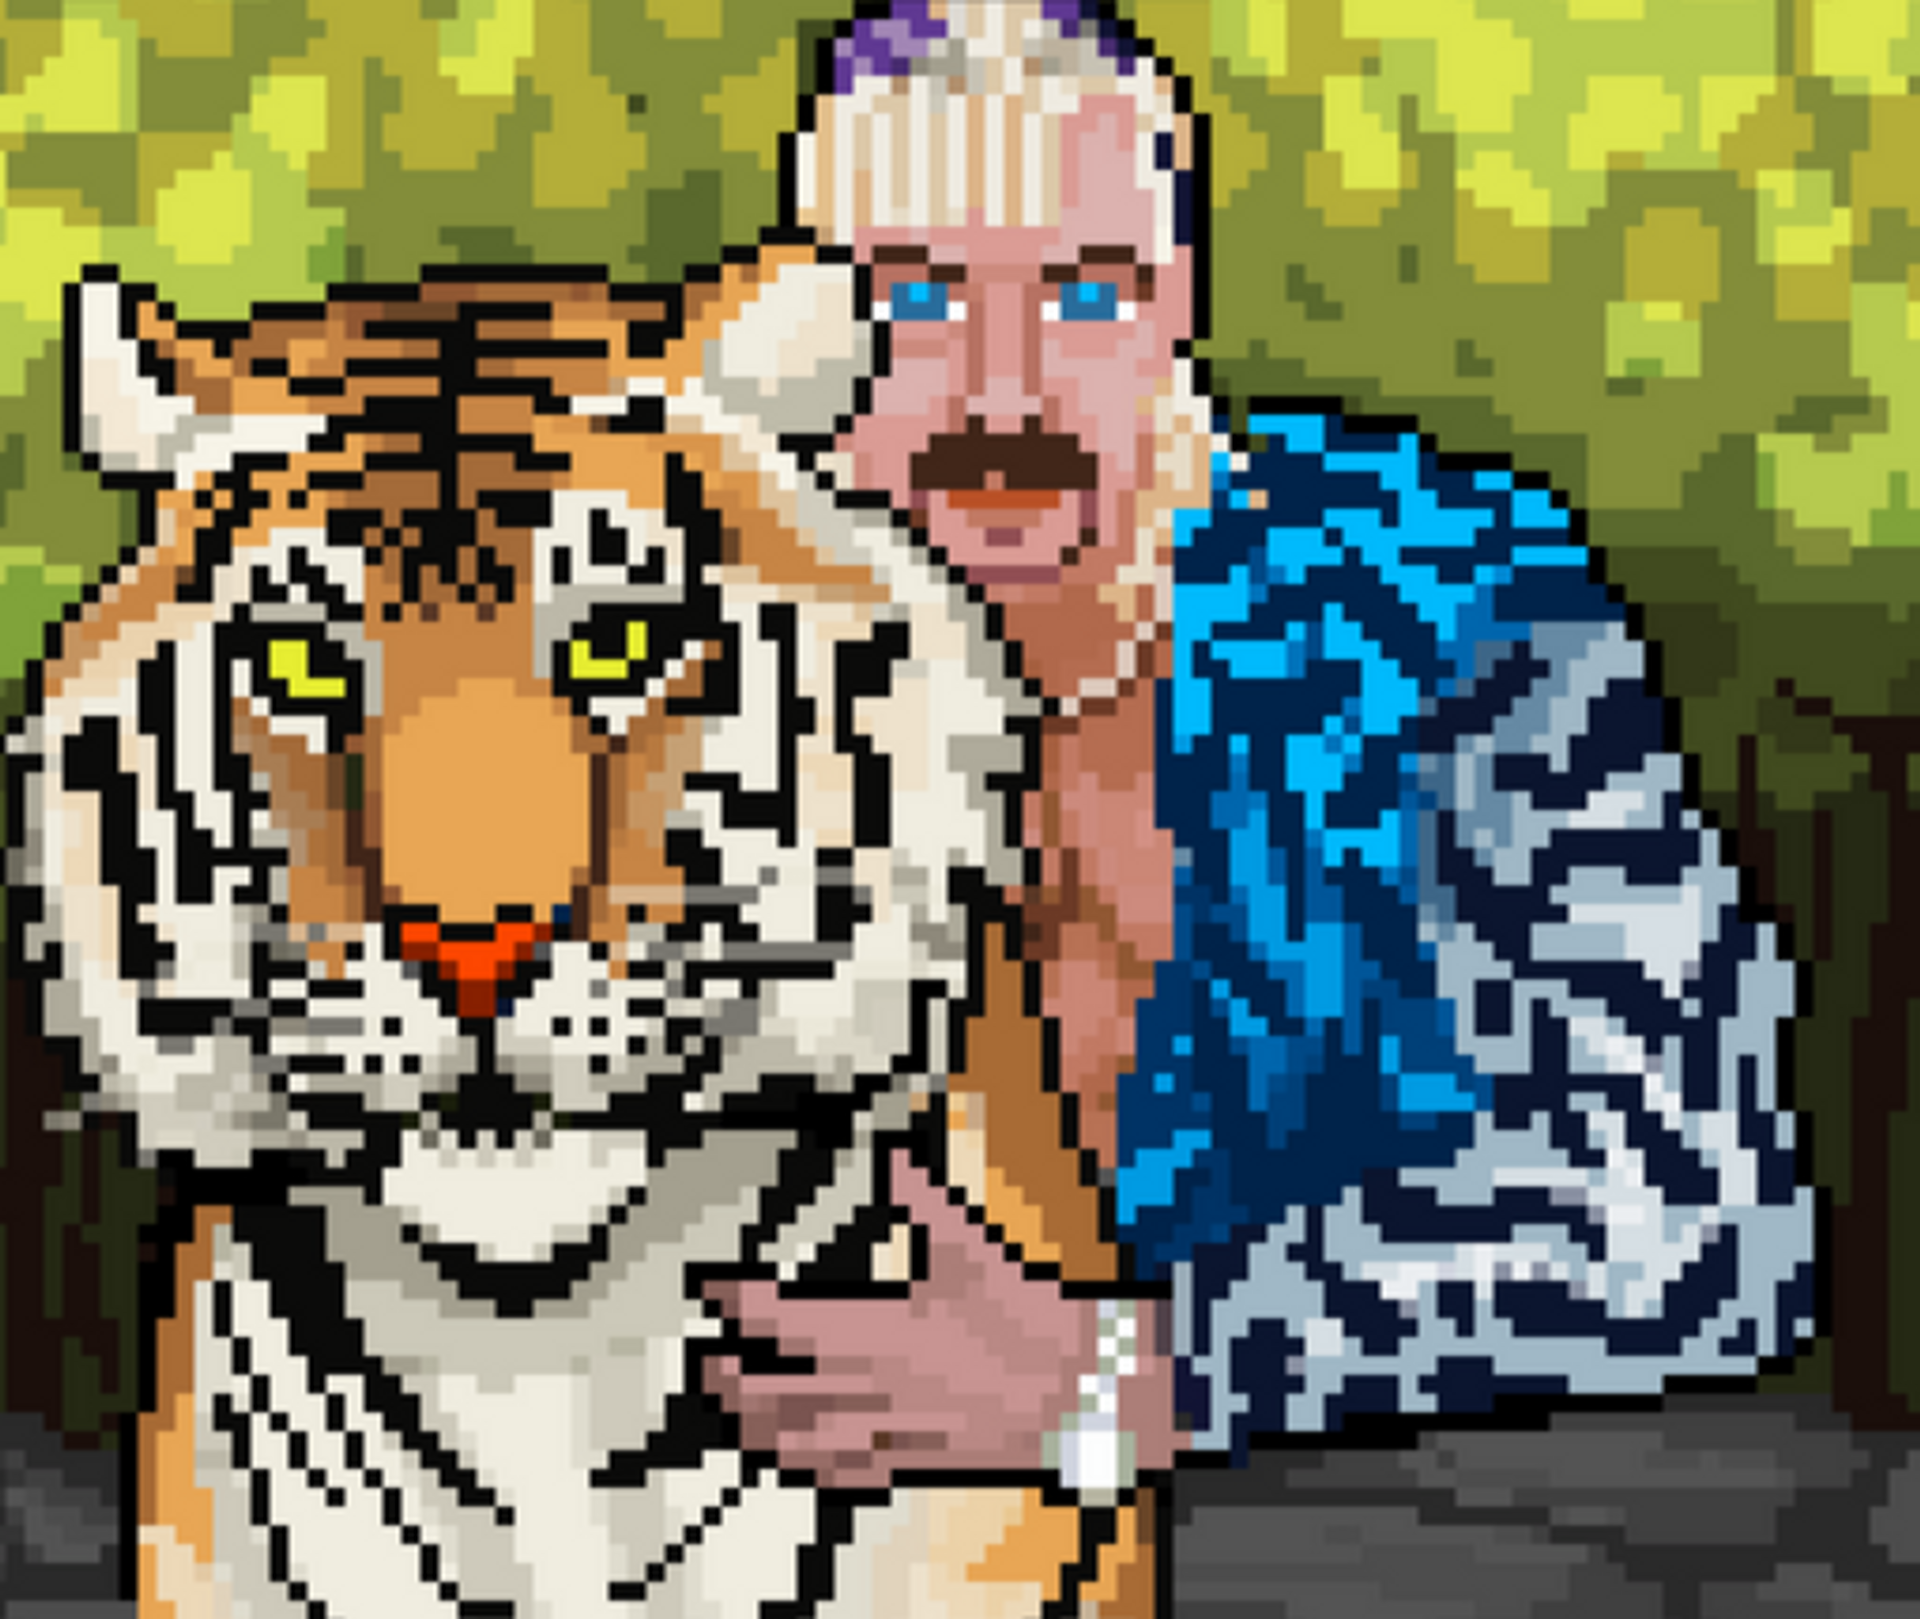 A portrait of Joe Exotic and his tiger Sarge is now available in pixelated form. The NFT edition size is limited to 3,900 which is the estimated number of tigers left in the world 